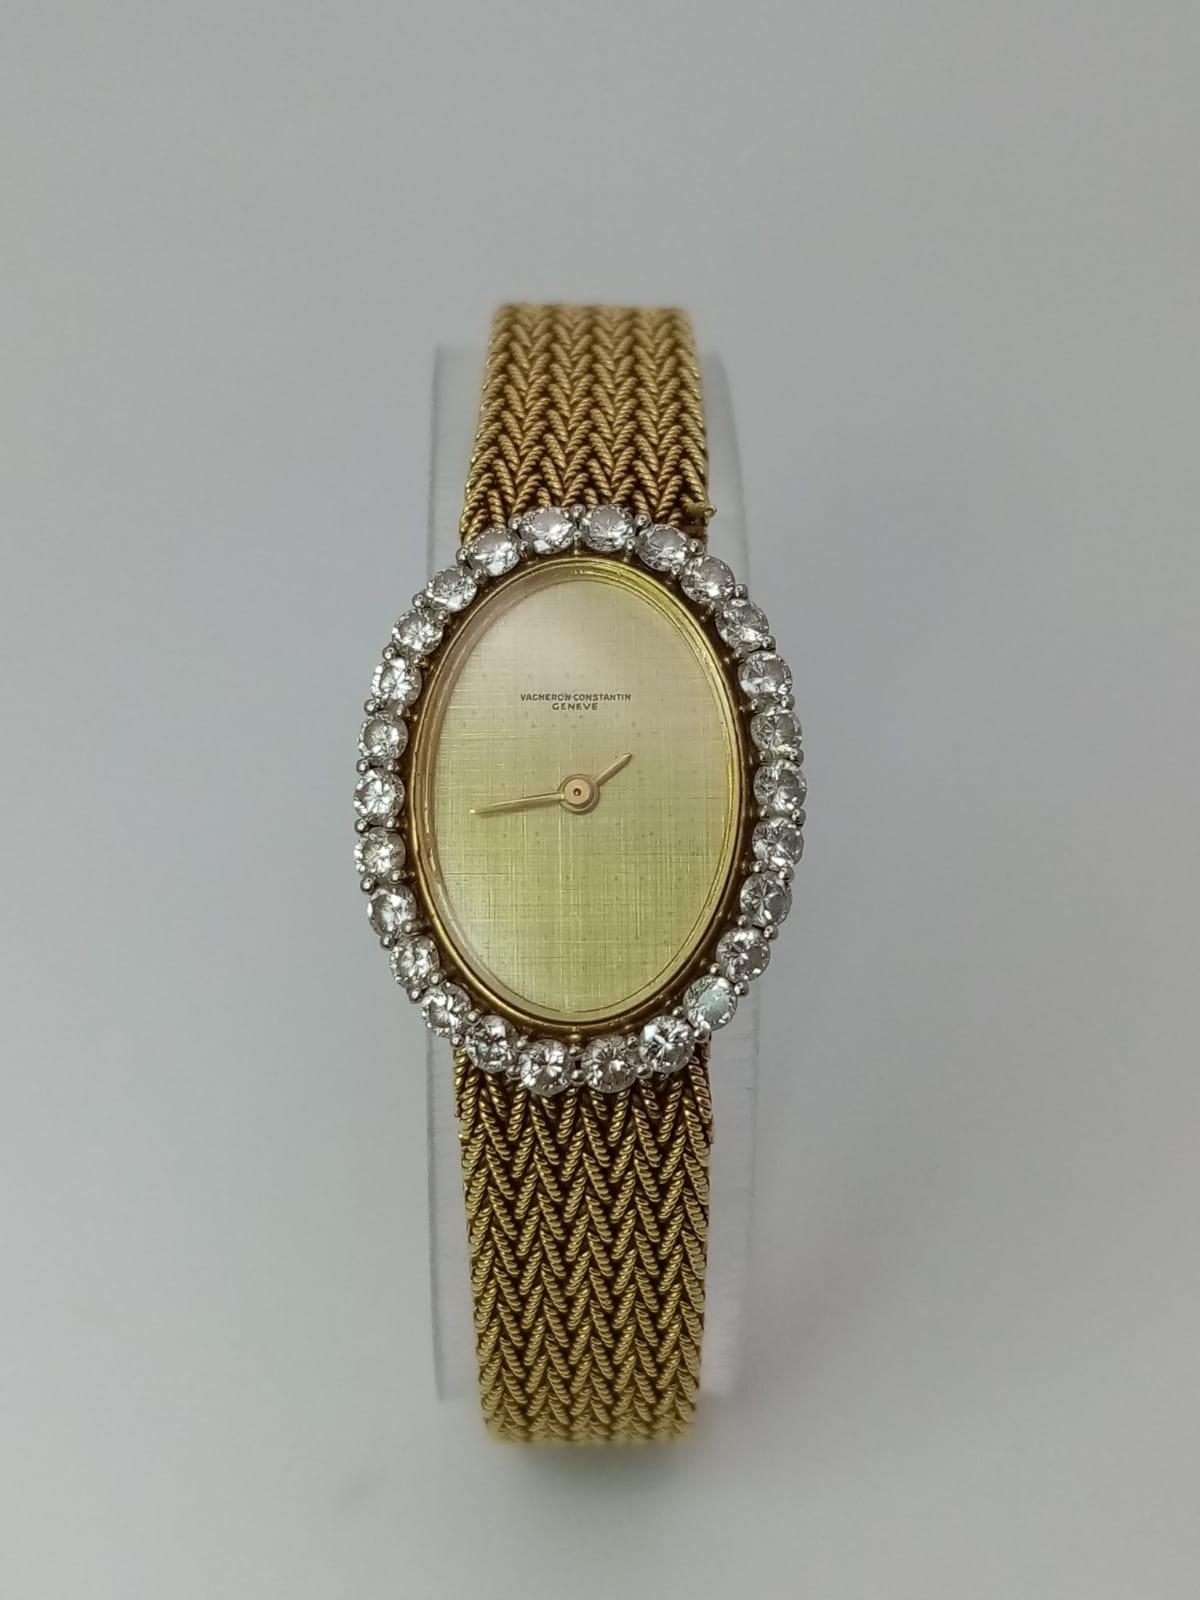 A Vacheron-Constantin 18K Yellow Gold and Diamond Ladies Watch. Gold bracelet and oval case - - Image 8 of 9